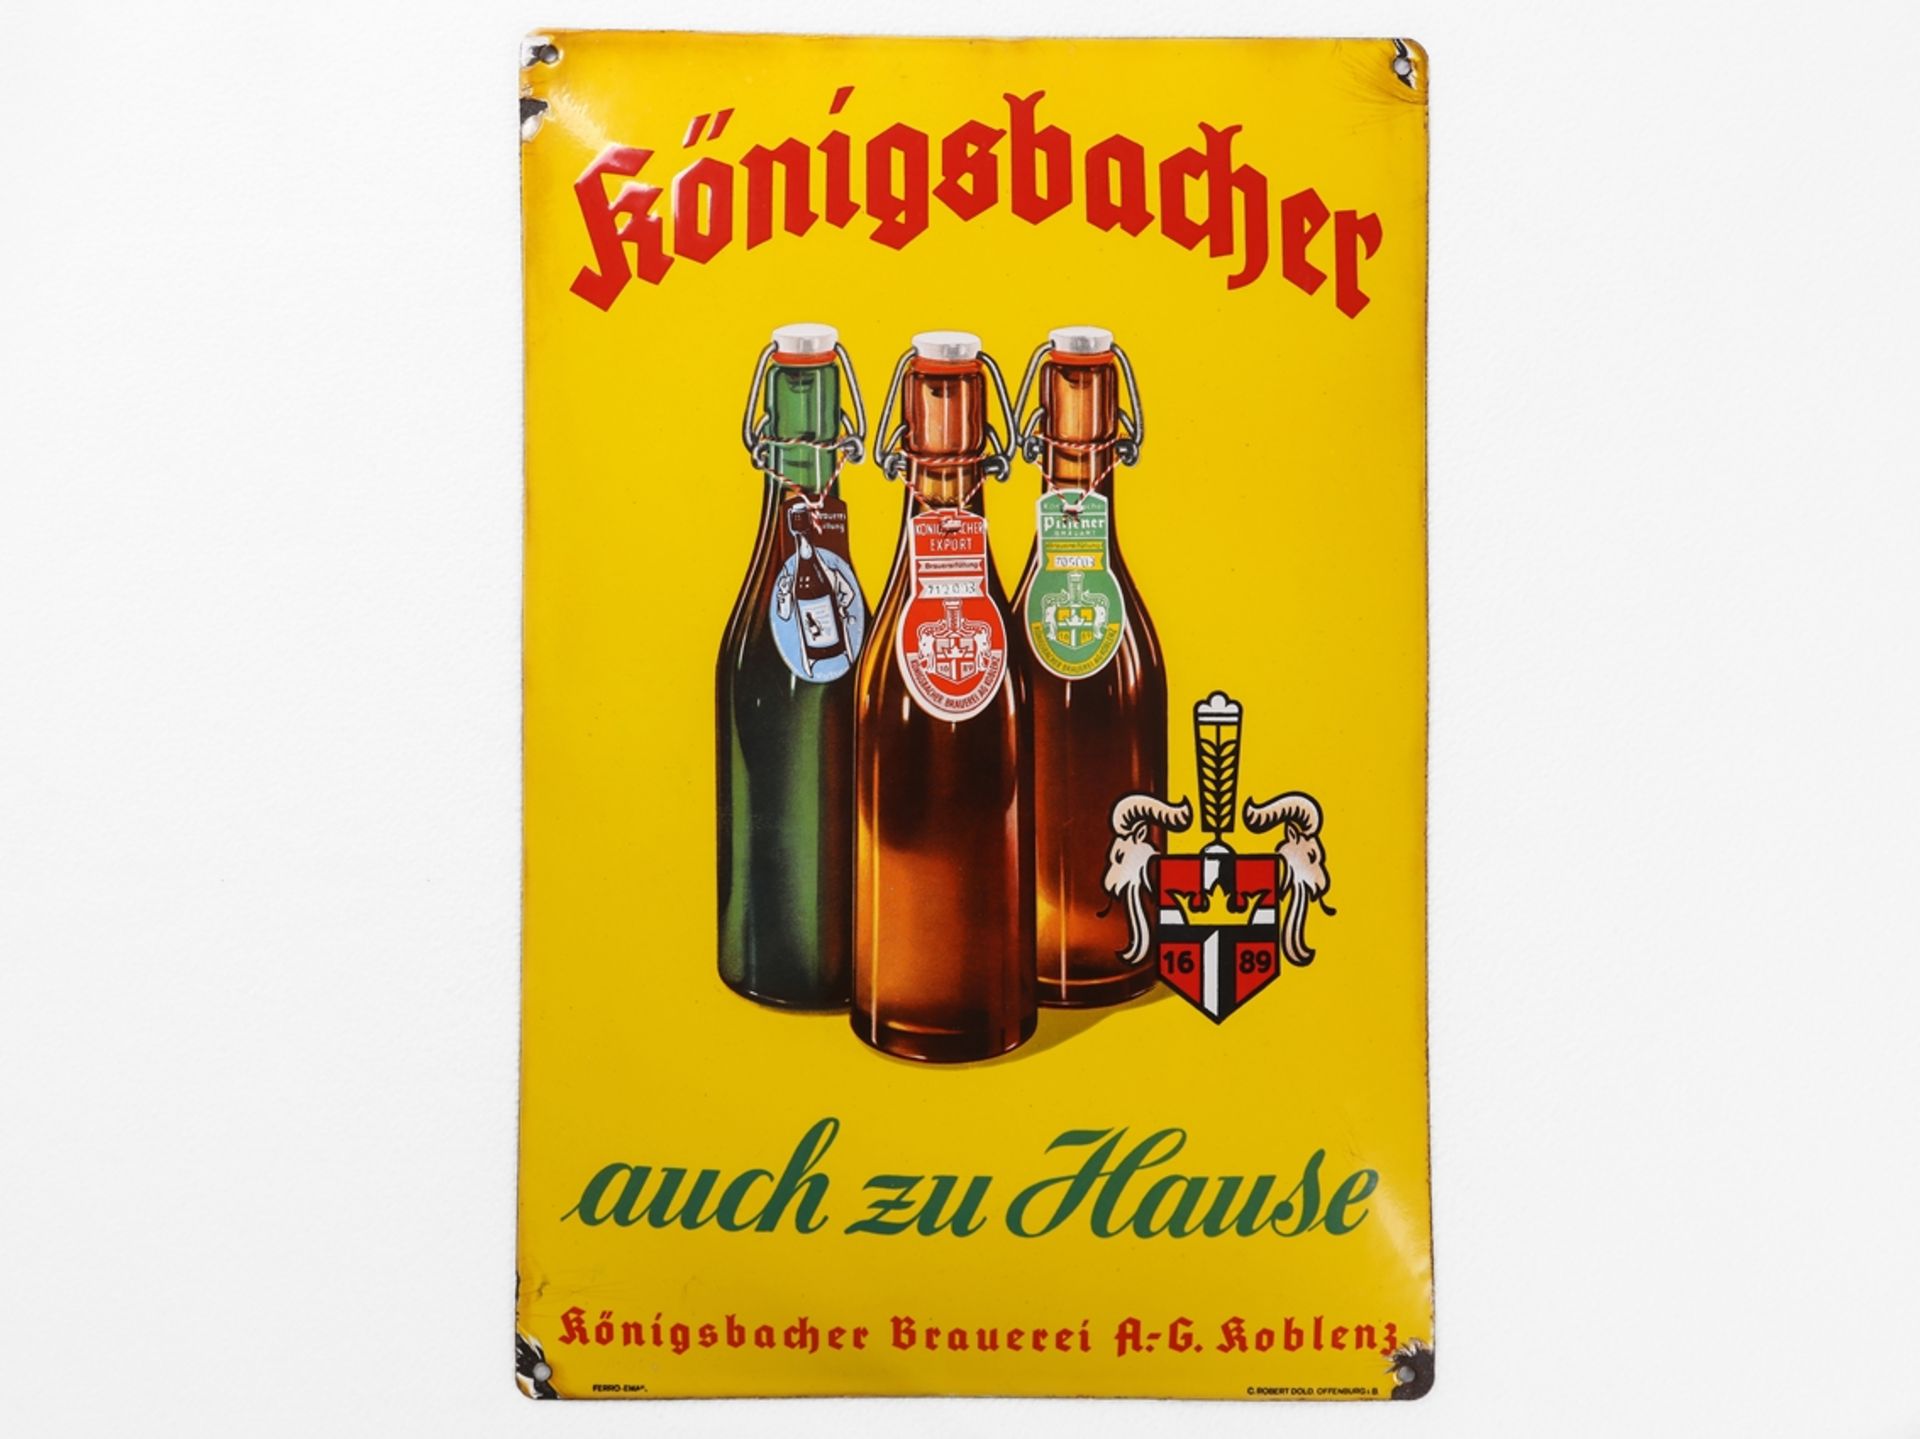 Enamel sign for the Königsbacher brewery in Koblenz, around 1930 - Image 7 of 7